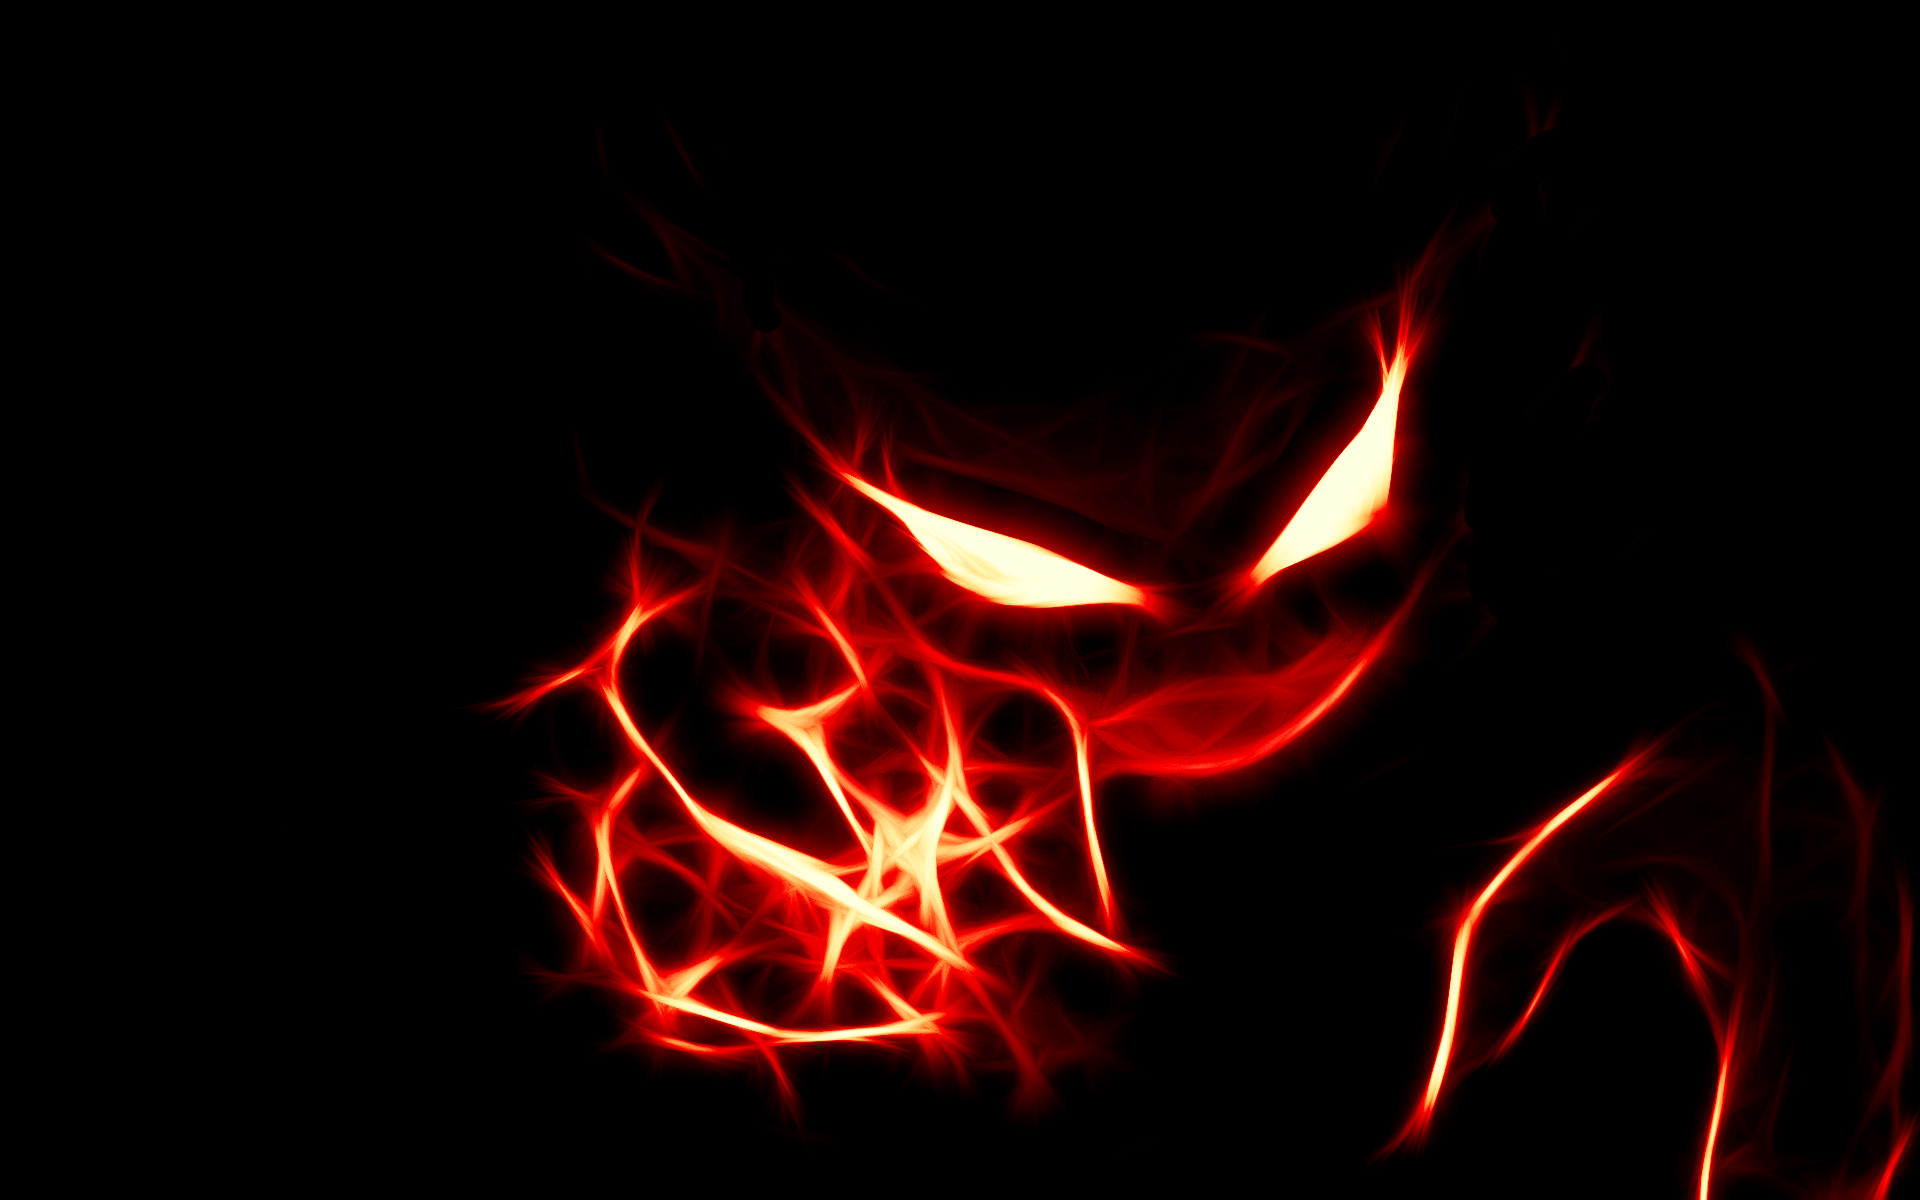 Free download haunter black background here you go red HD Wallpaper of Anime Manga [1920x1200] for your Desktop, Mobile & Tablet. Explore Red and Black Anime Wallpaper